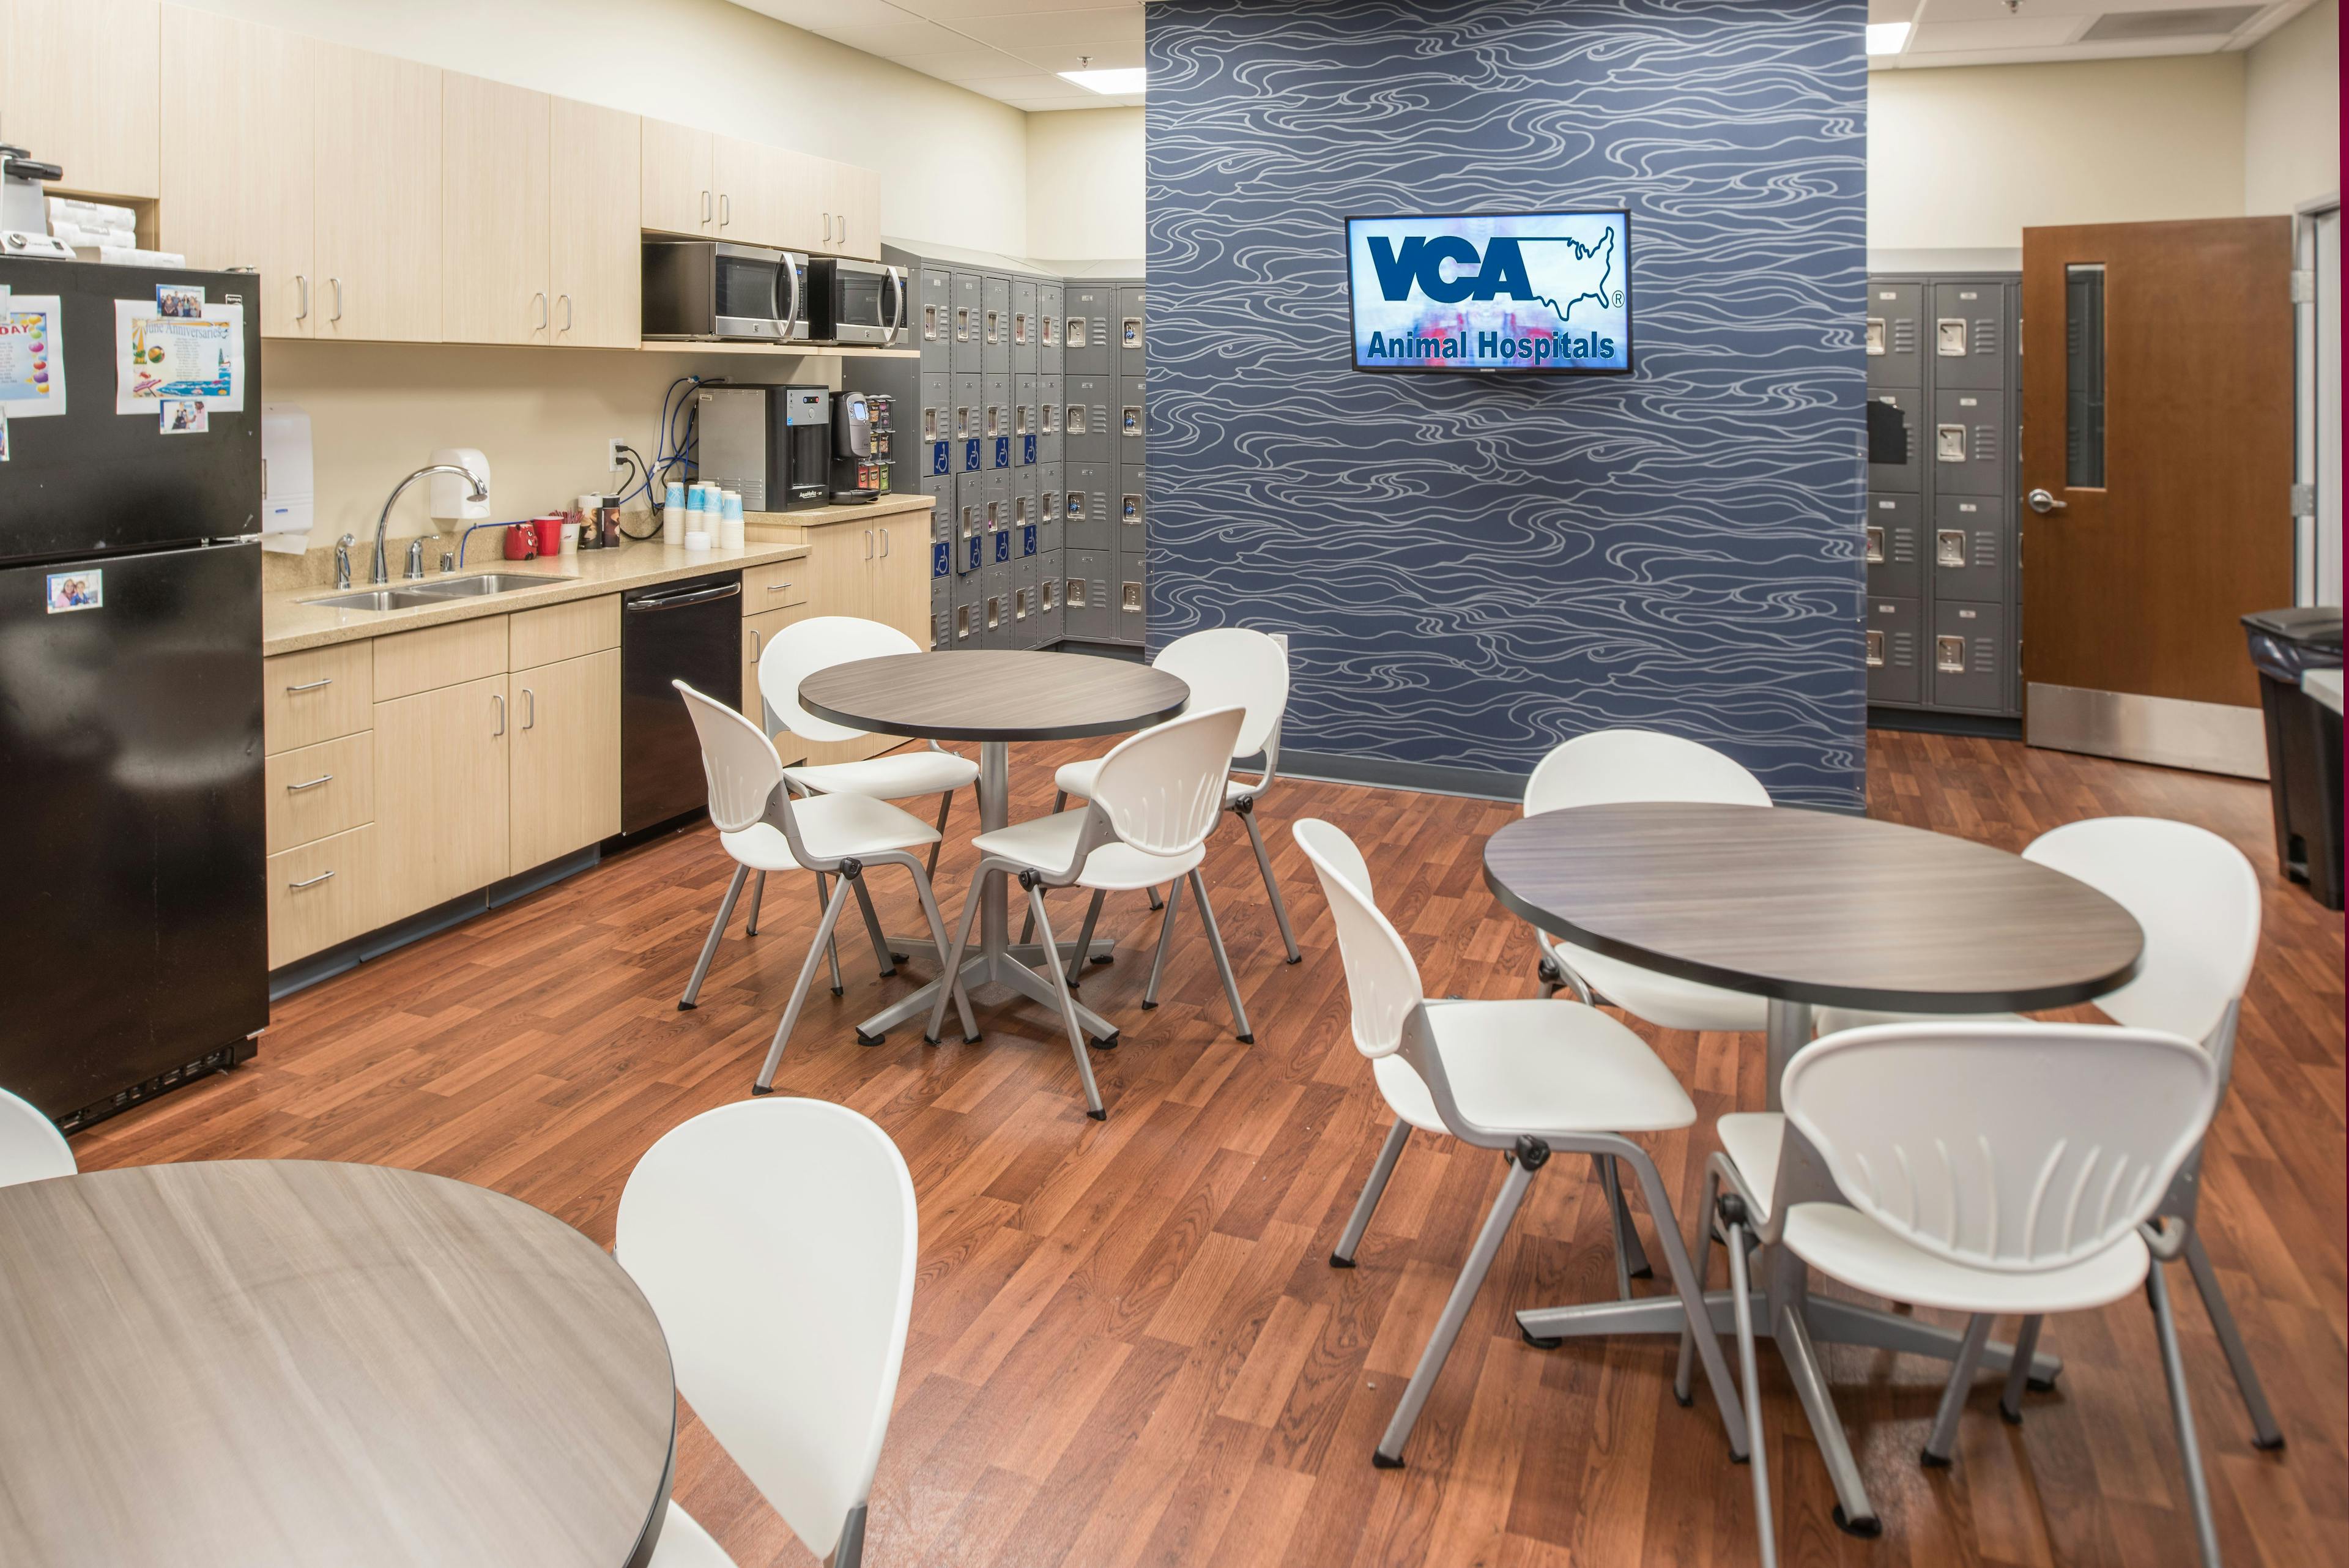 Doctors and staff enjoy access to a large break room throughout their busy shifts. A full kitchen, sitting area, and lockers allow for time away to recharge.